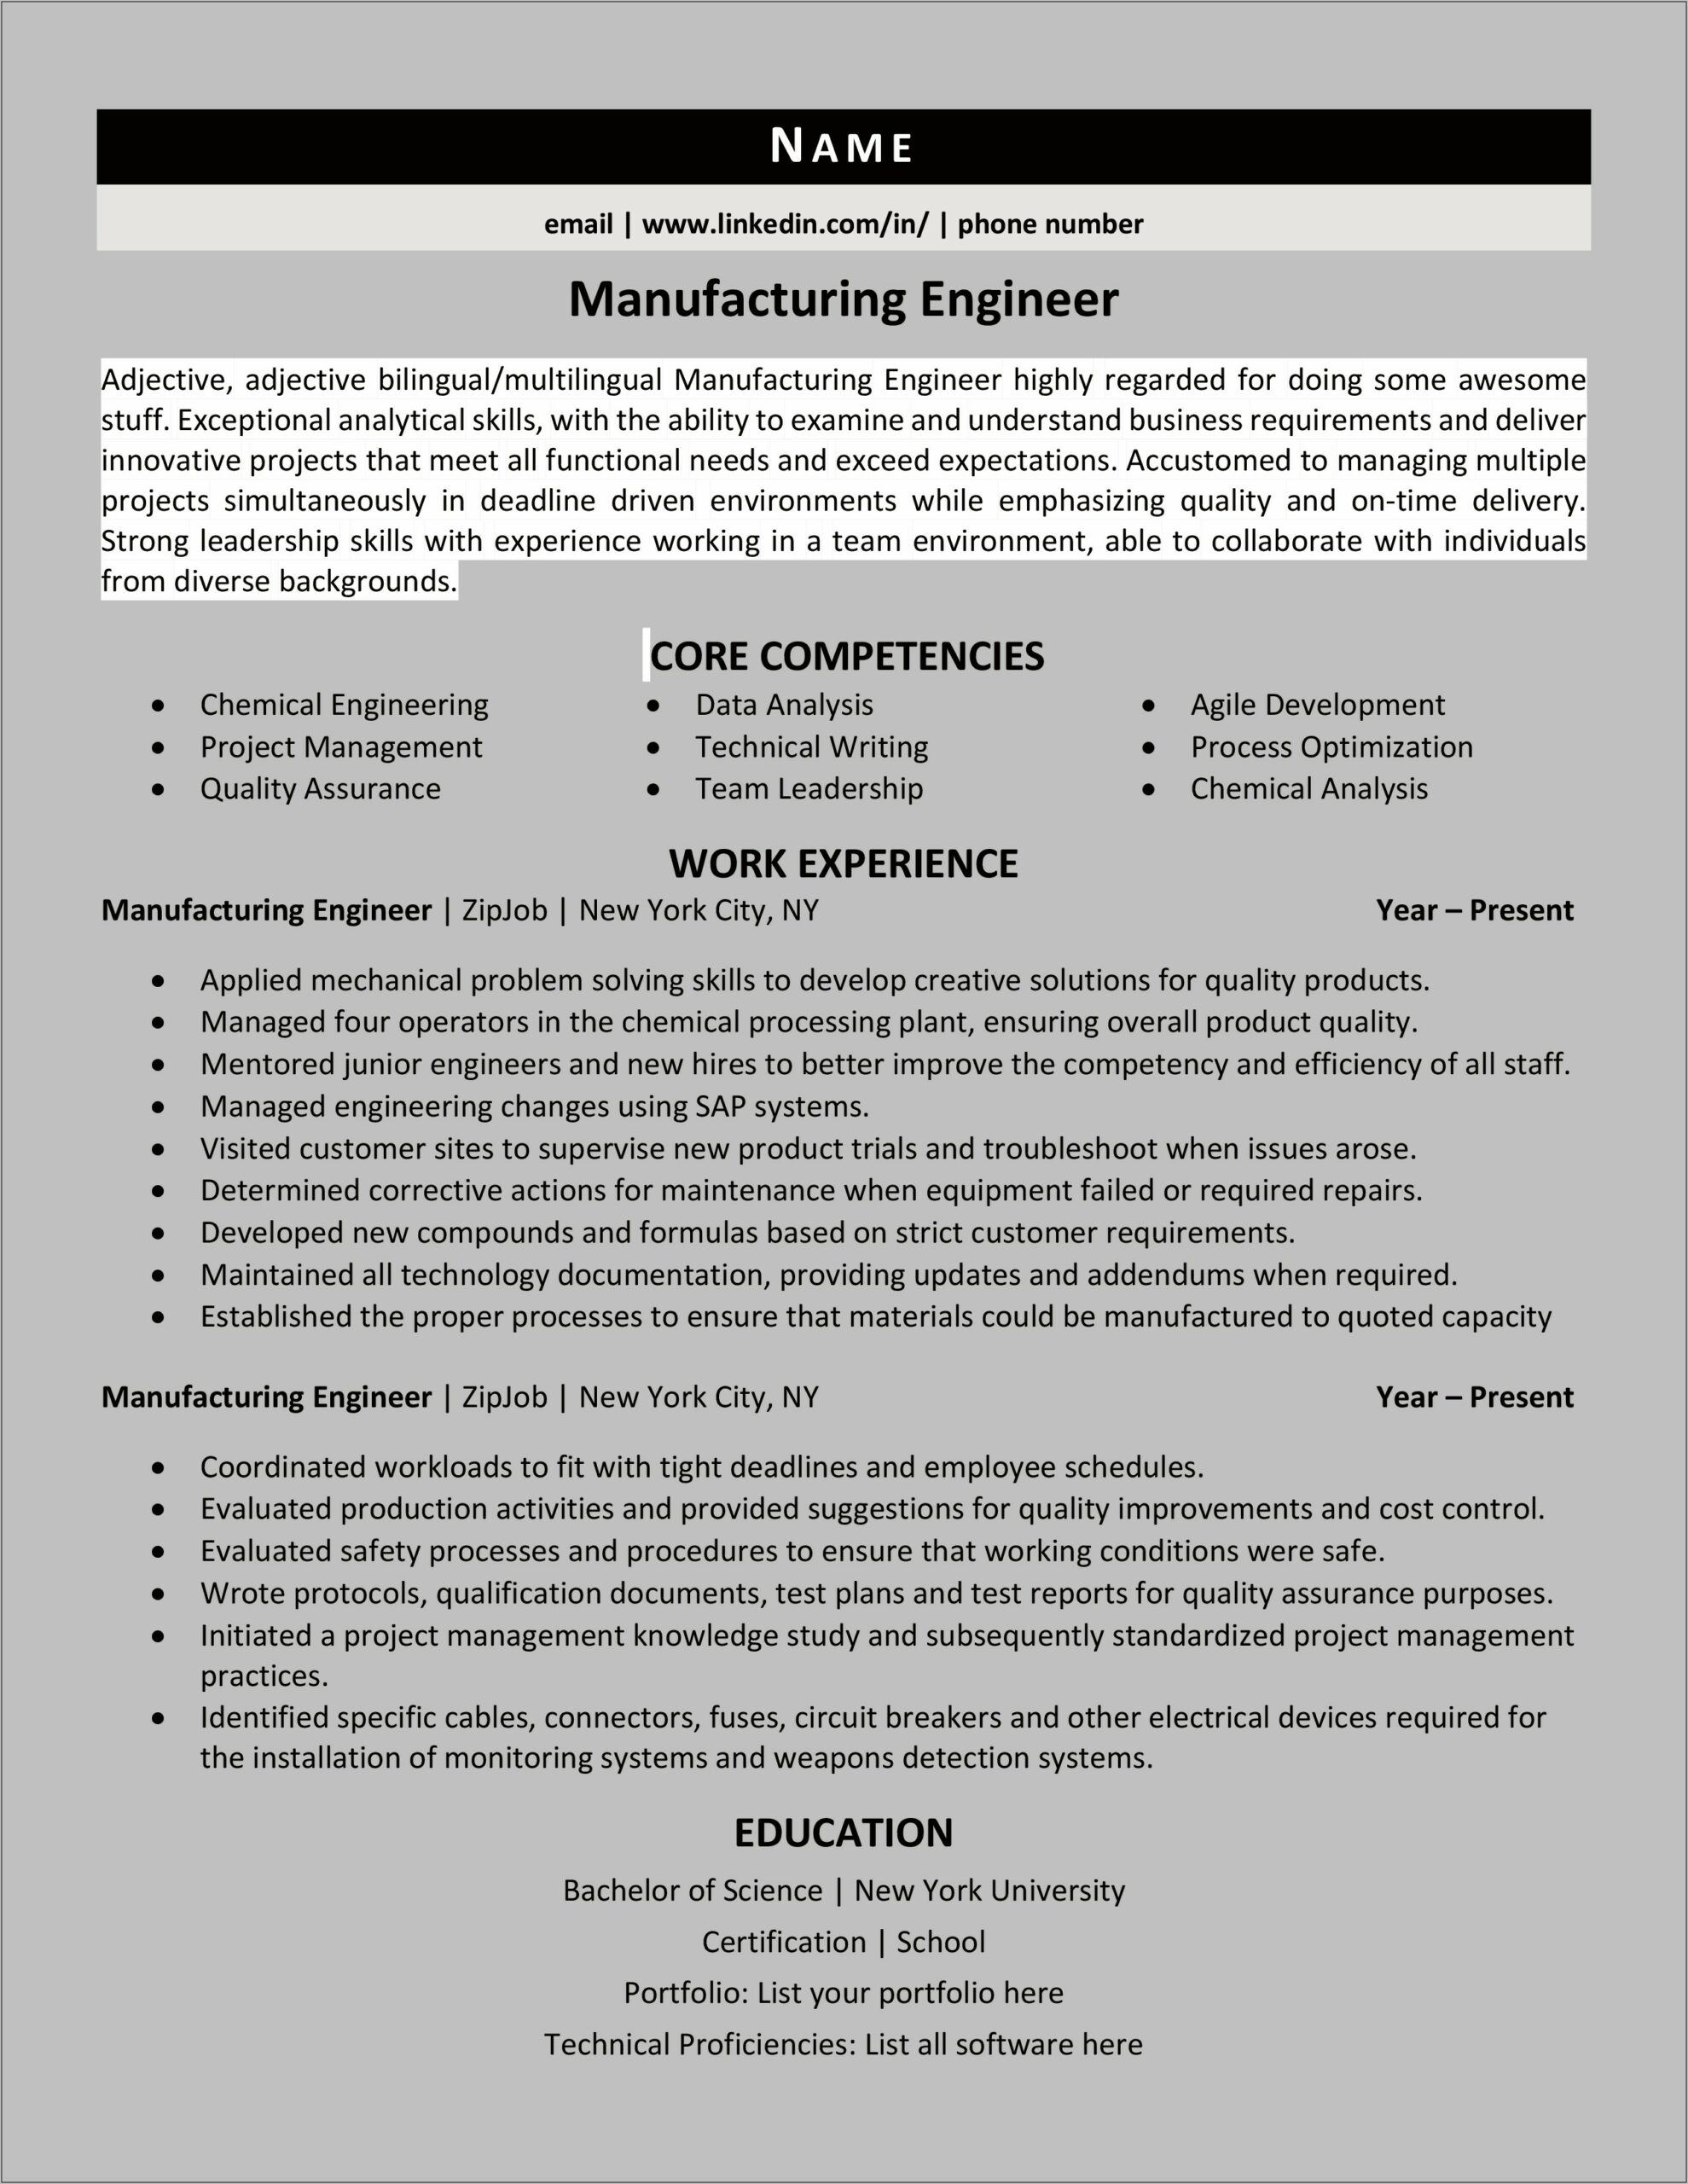 Manufacturing Skills And Abilities Resume